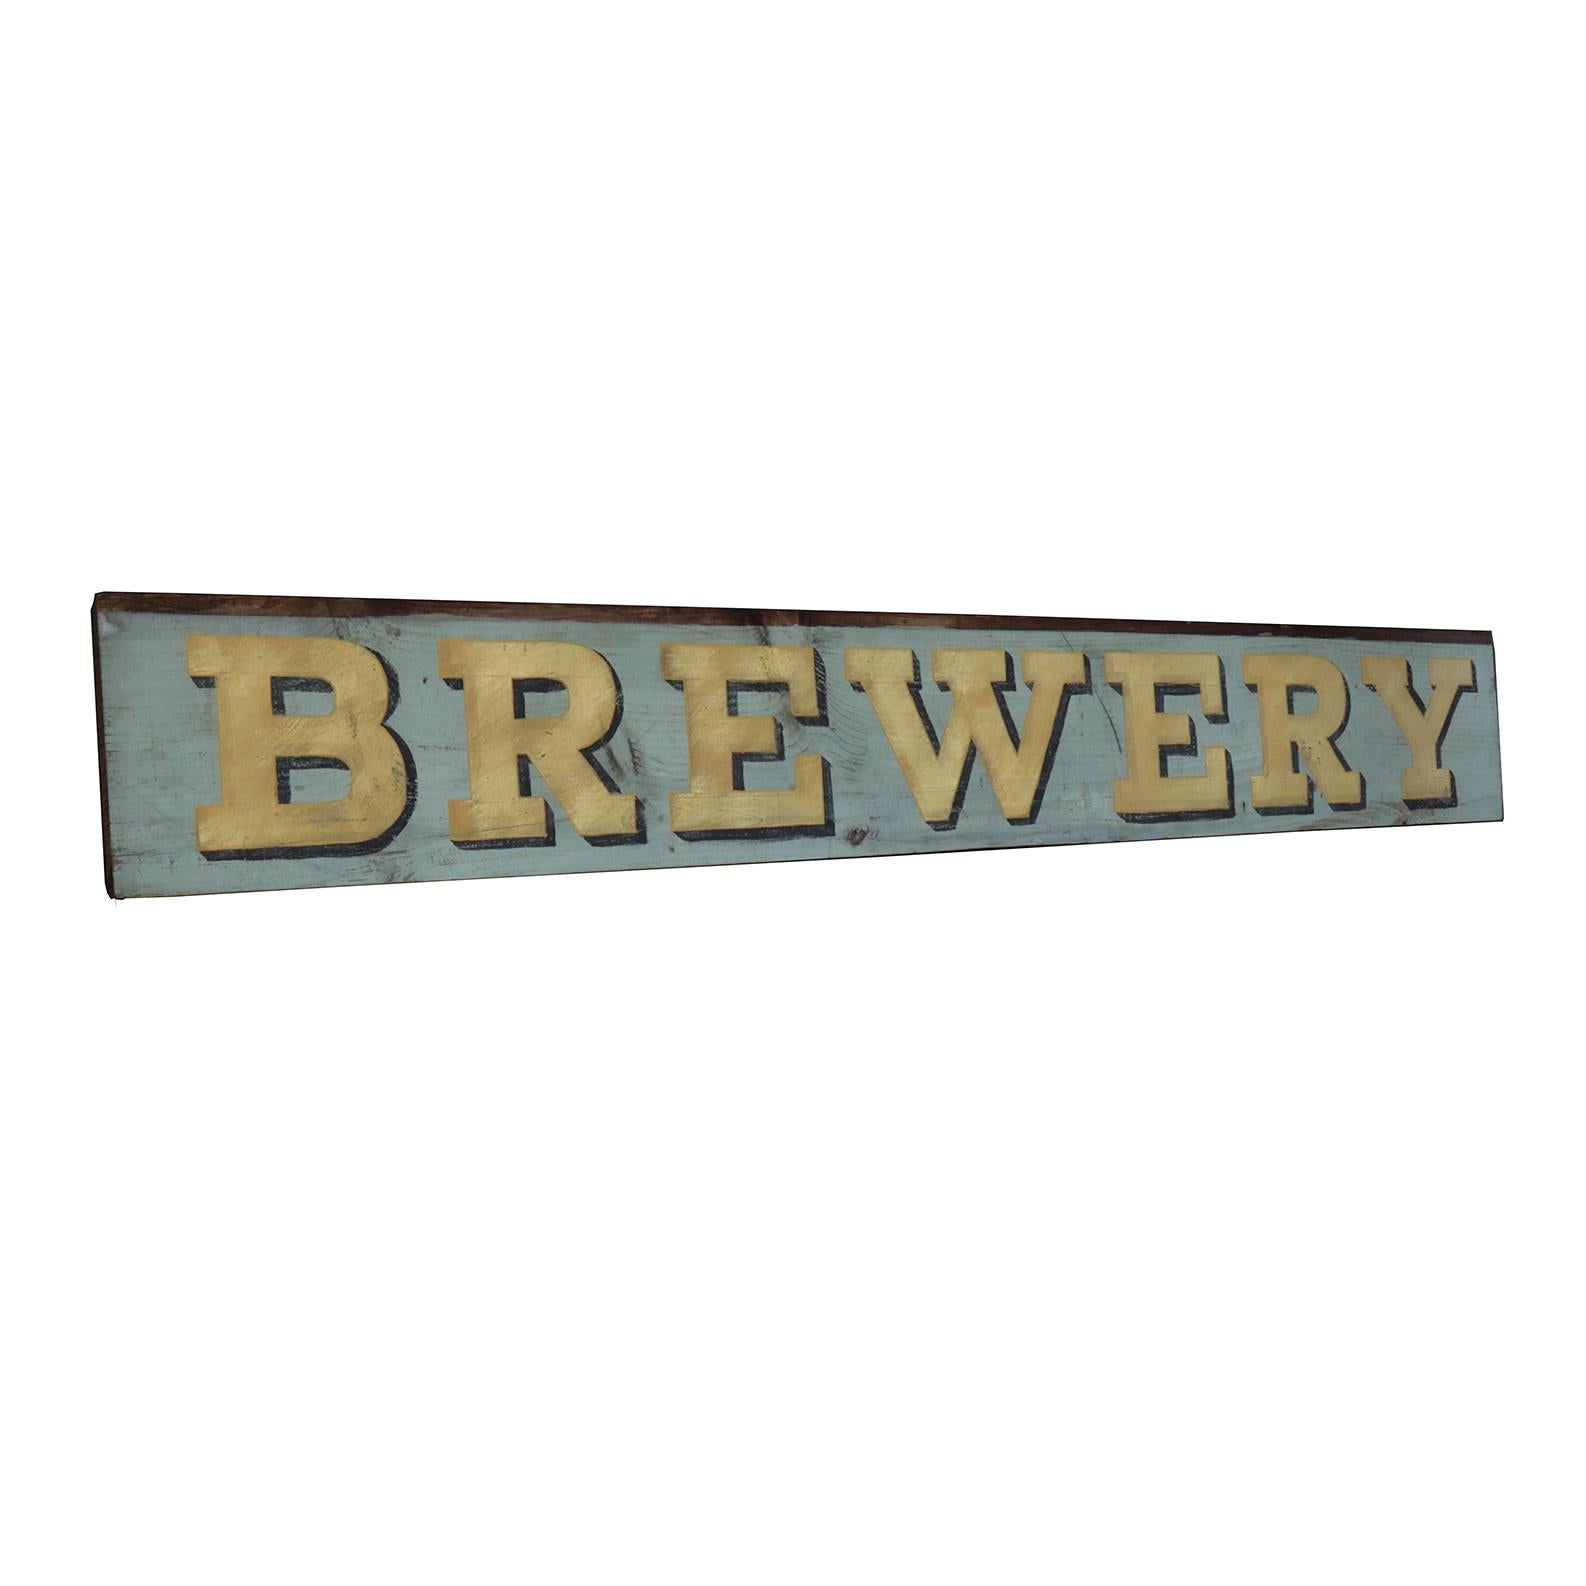 This phenomenal sign is for the breweriana lovers out there in the world. Found in the bowels of an east coast factory, the hand-painted details on this pre-prohibition era sign are still in fantastic condition. The gold paint still retains some